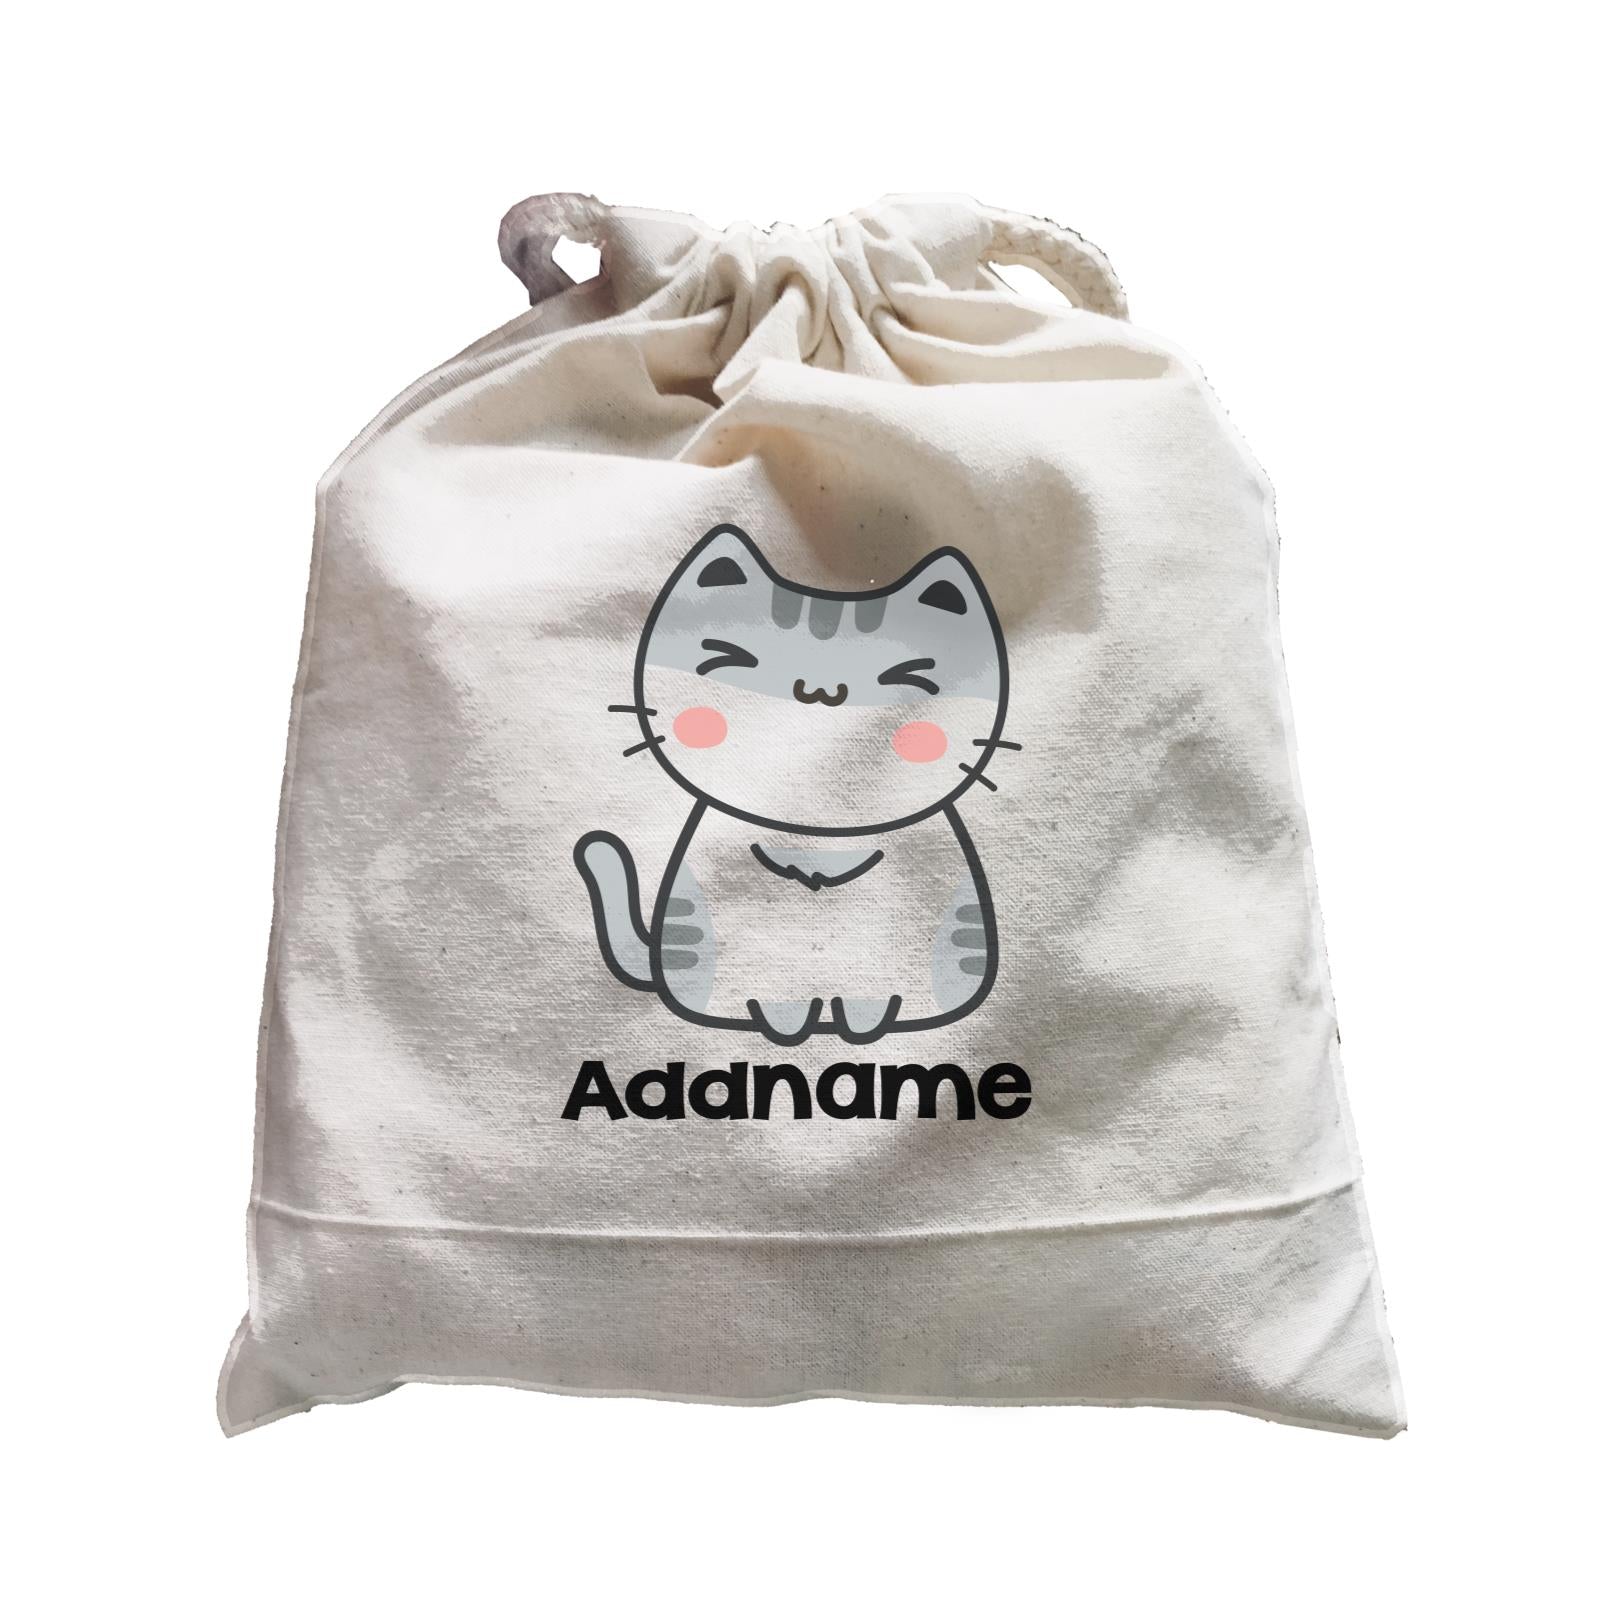 Drawn Adorable Cats White & Grey Addname Satchel